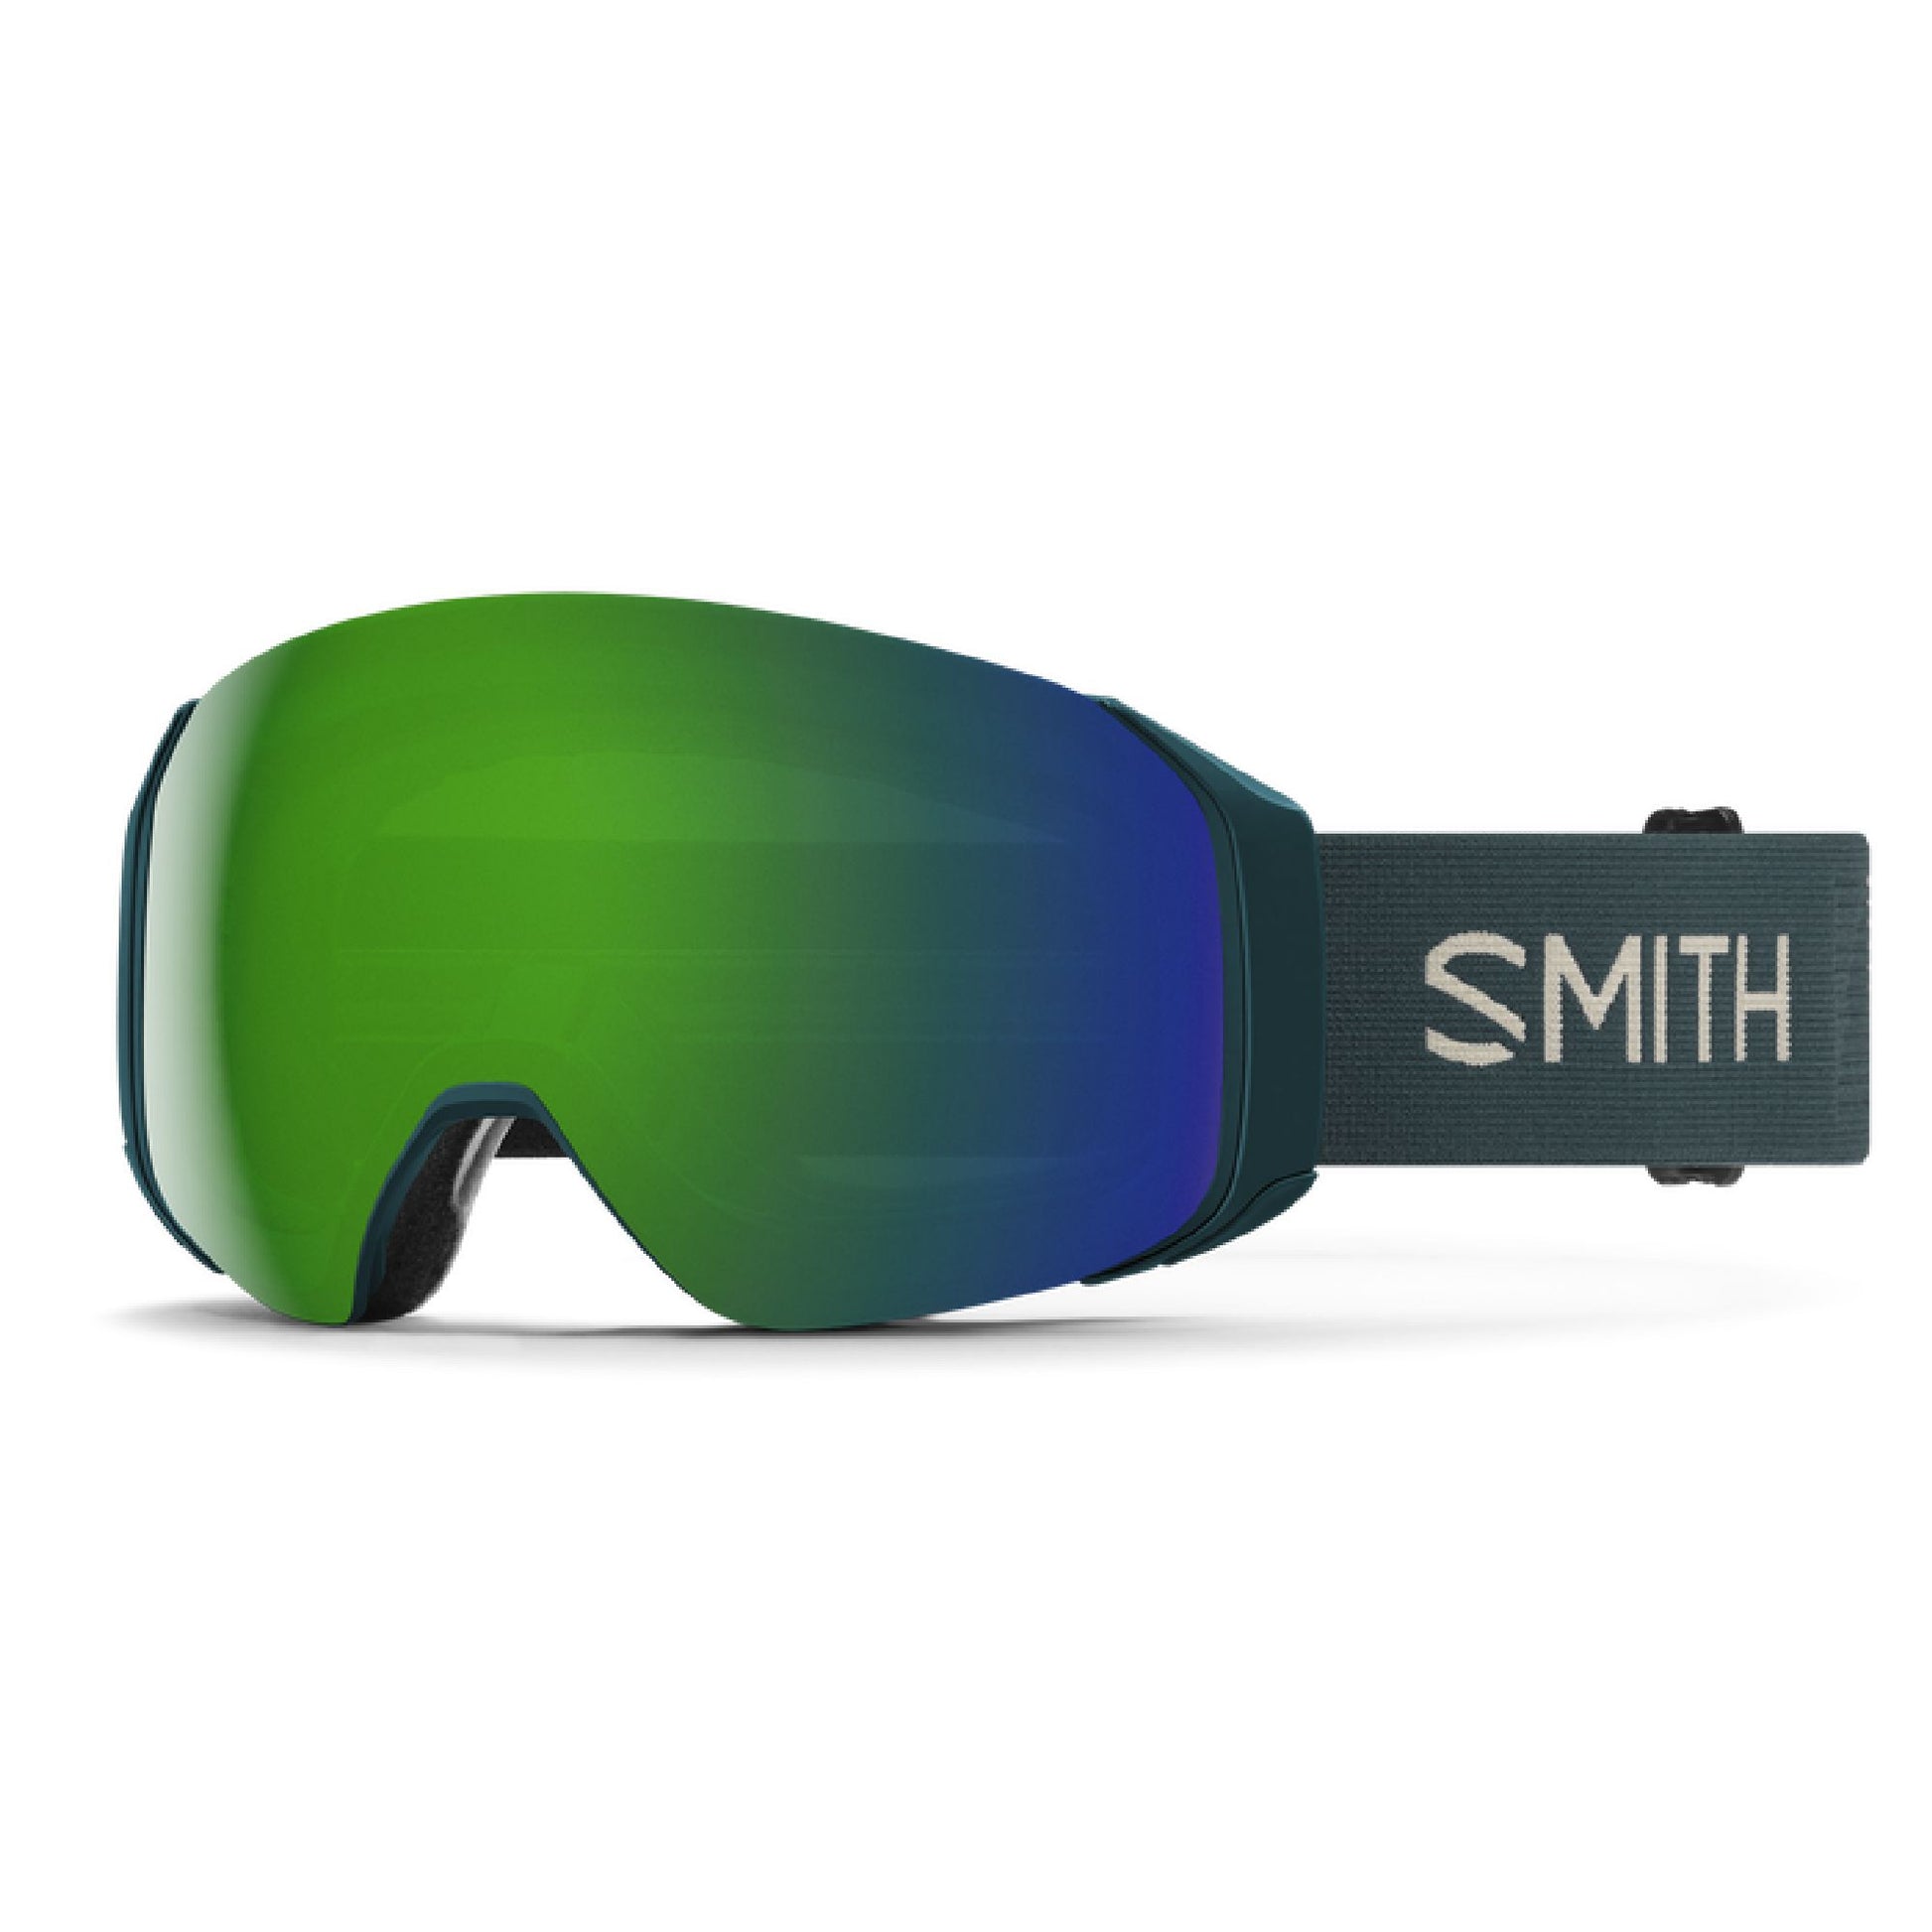 Smith 4D MAG S Low Bridge Fit Snow Goggle Pacific Flow ChromaPop Everyday Green Mirror Snow Goggles